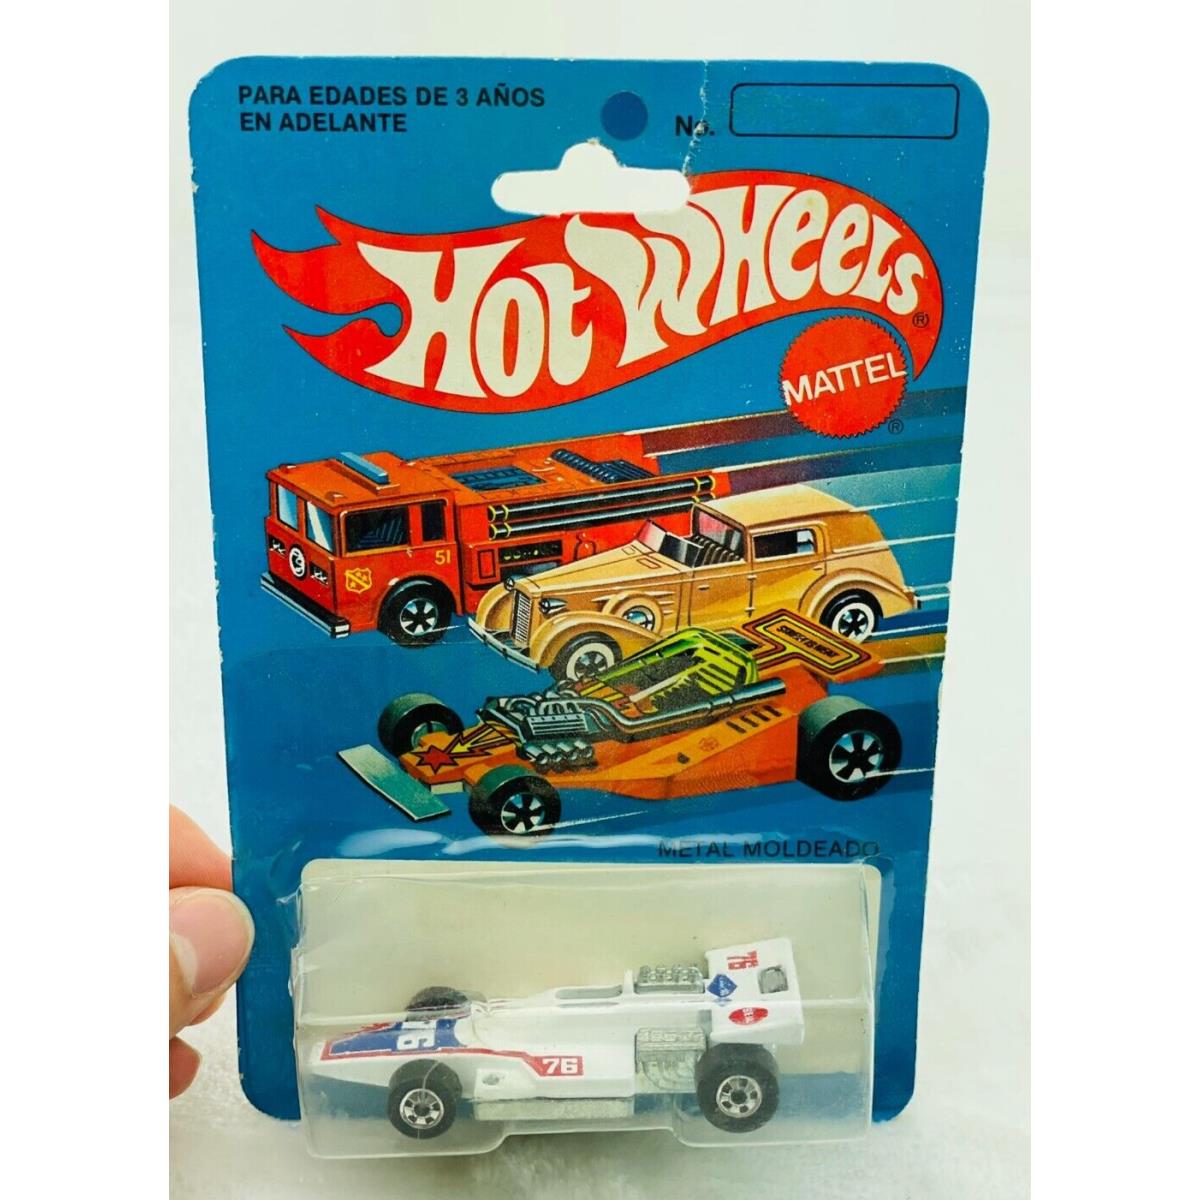 Hot Wheels Blackwall Formula 5000 White Mexico Mexican Aurimat in Blisterpack